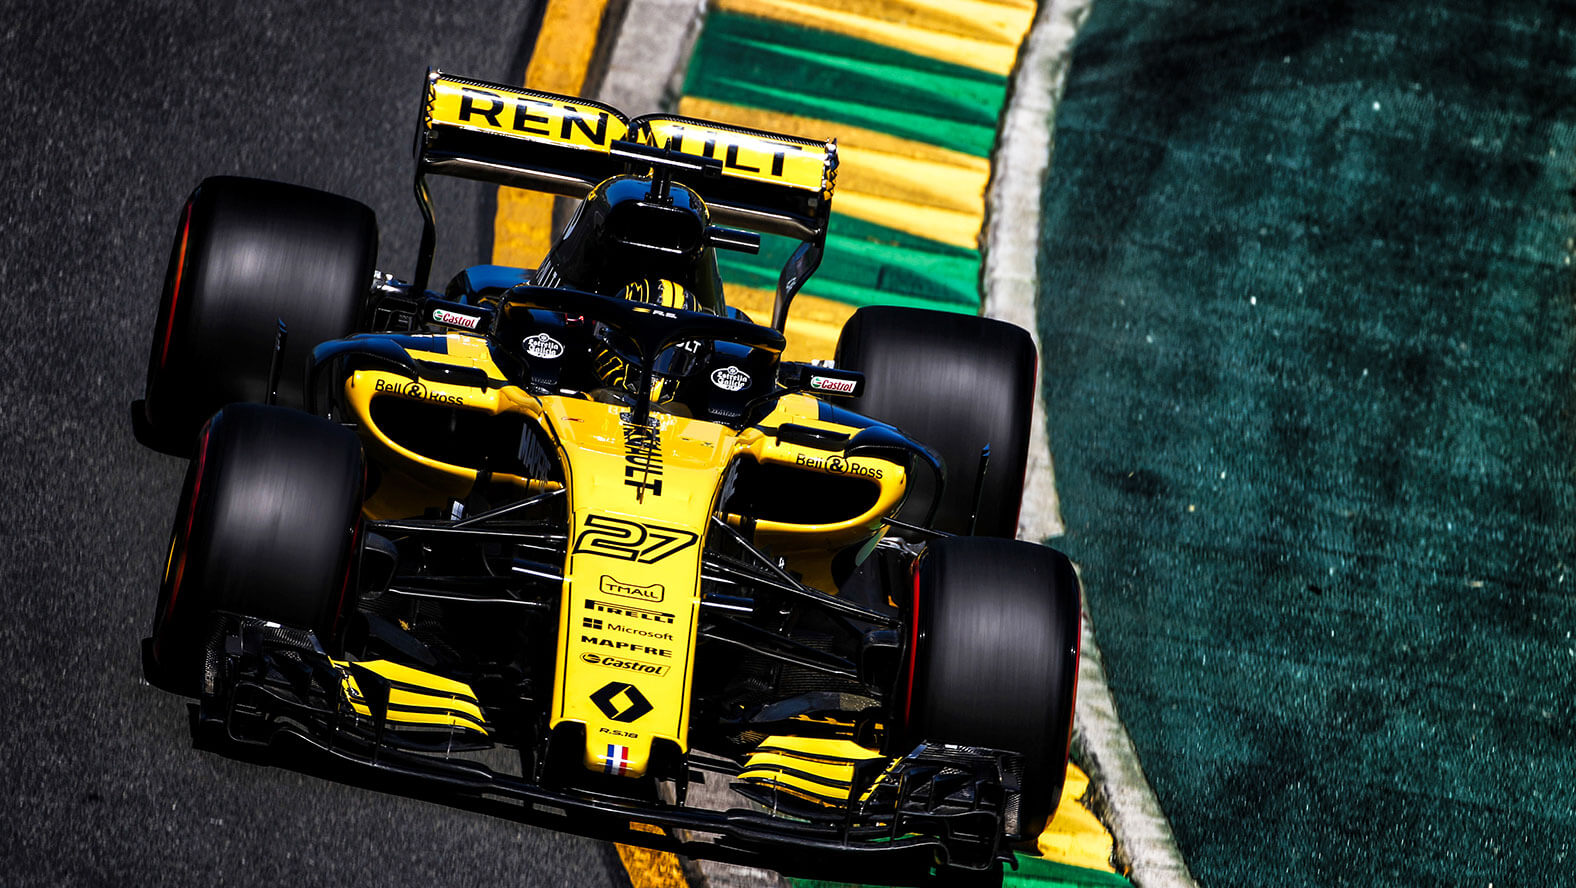 Renault Sport Formula One™ Team has relied on Roland DG for its racing car vehicle graphics.